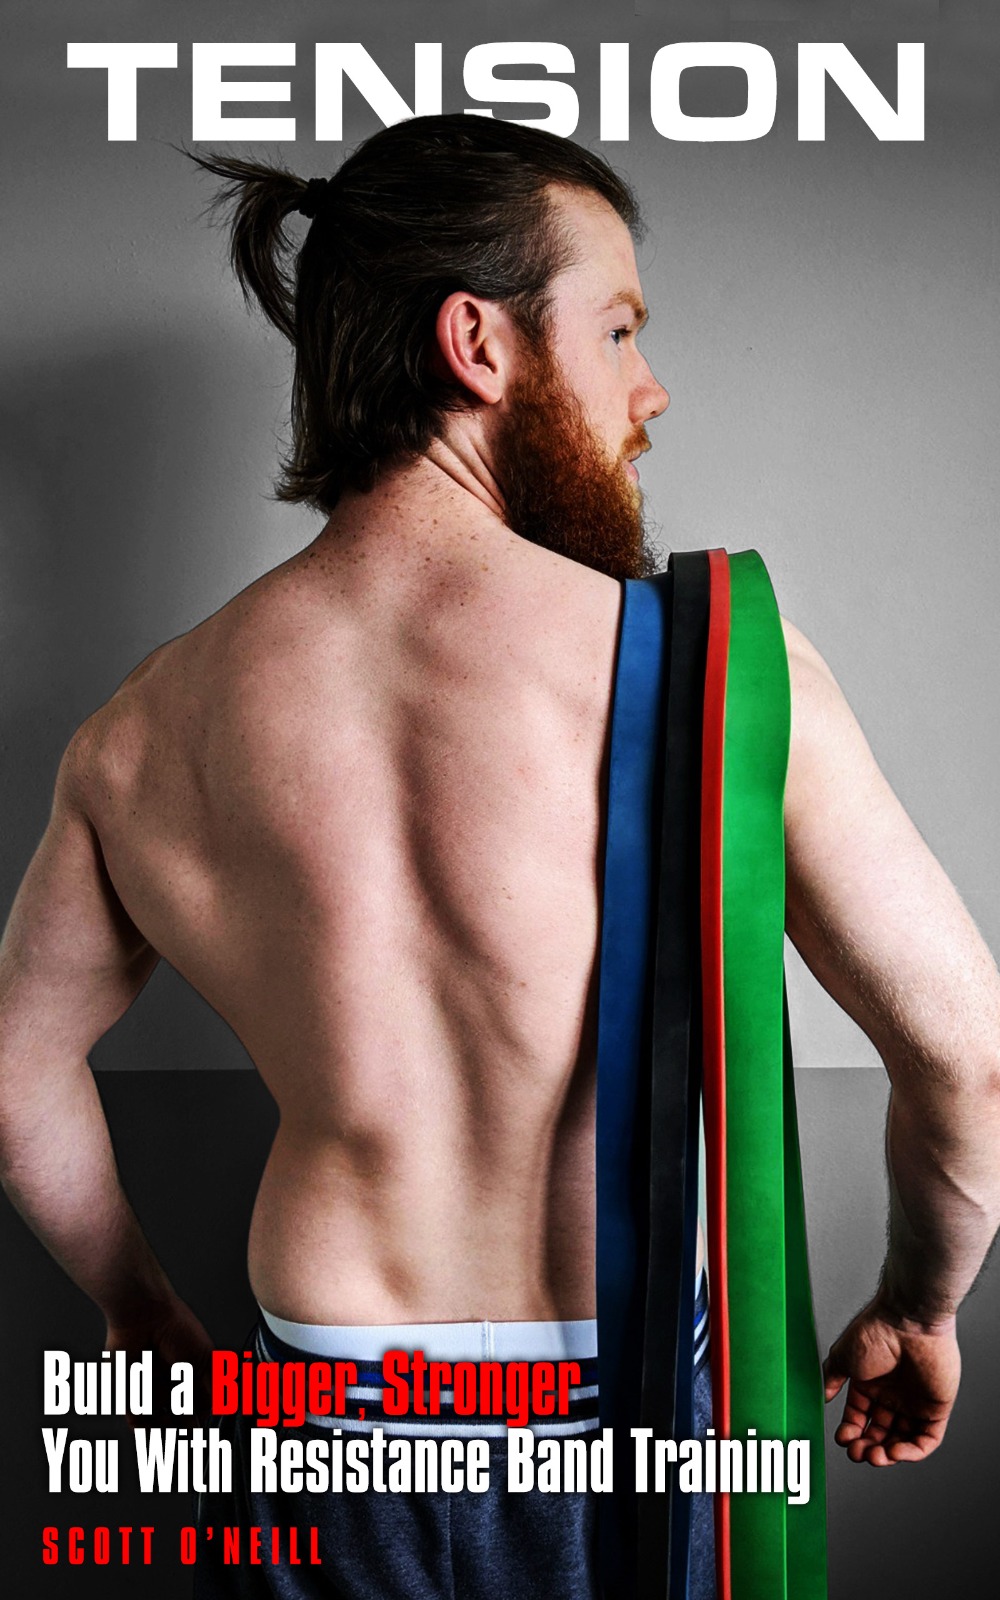 FREE: Tension: Build a Bigger, Stronger You With Resistance Band Training by Scott O’Neill